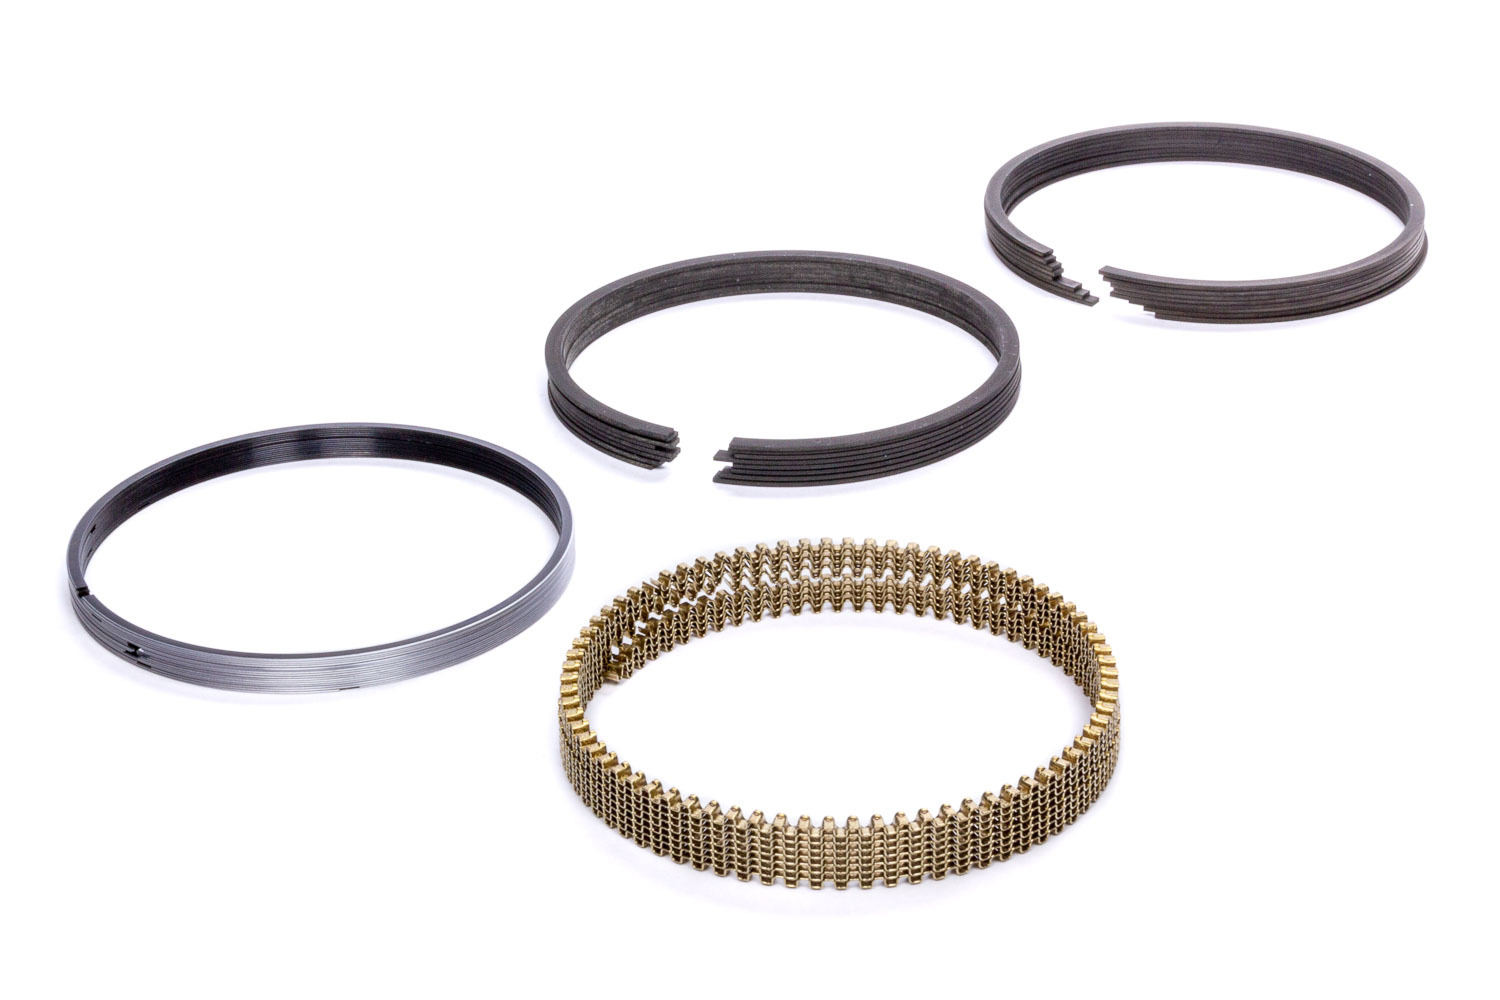 Hastings Piston Rings SN9035 Piston Rings, Premium Ductile and Steel Series, 3.898 in Bore, Drop In, 1.2 x 1.2 x 3.0 mm Thick, Standard Tension, Stainless Steel, Gas Nitride, 8-Cylinder, Kit